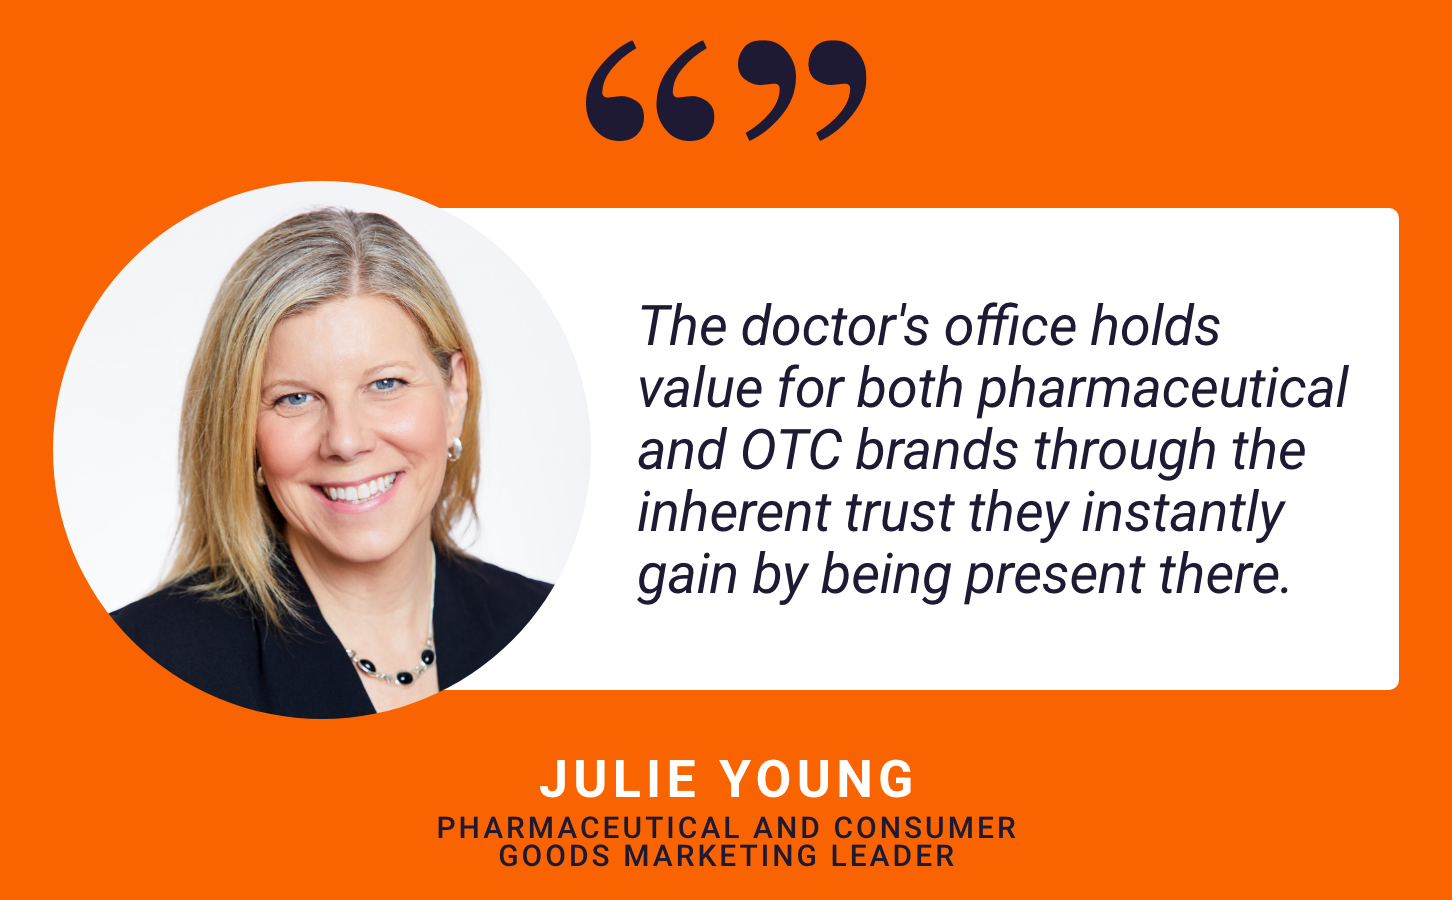 "The doctor's office holds value for both pharmaceutical and OTC brands through the inherent trust they instantly gain by being present there.” -Julie Young, Pharmaceutical and Consumer Goods Marketing Leader